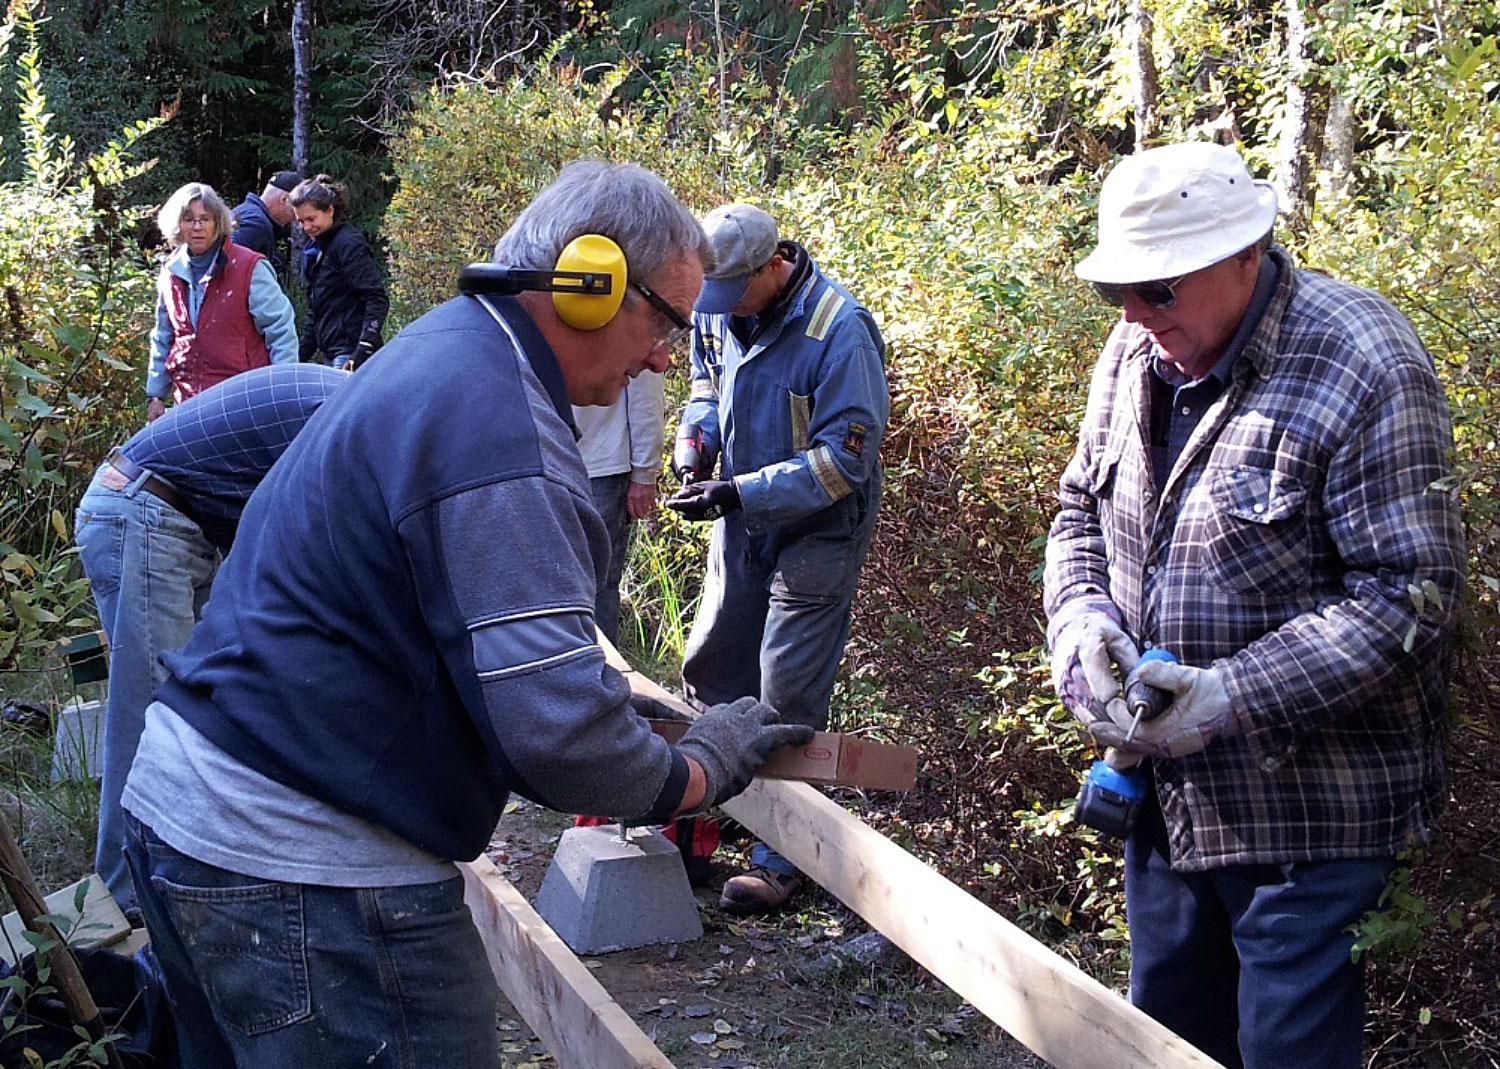 Group of people working on building a boardwalk.